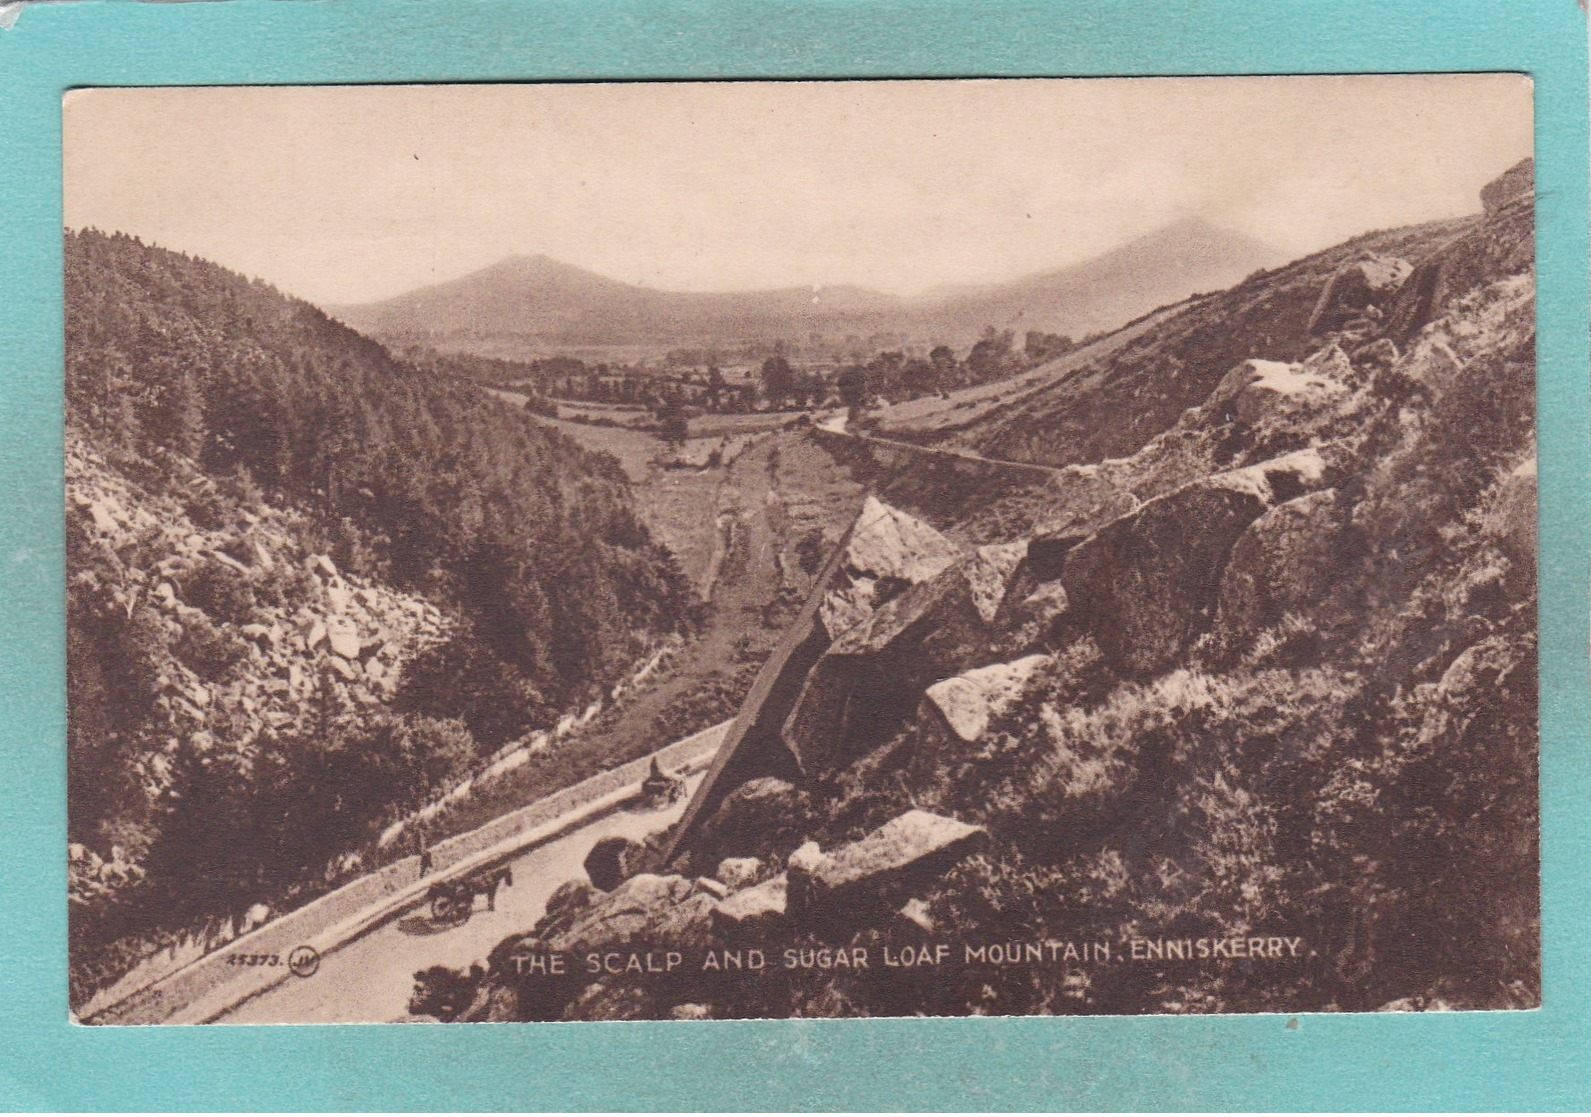 Small Post Card Of The Scalp And Sugar Loaf Mountain,Enniskerry, County Wicklow, Ireland V89. - Wicklow